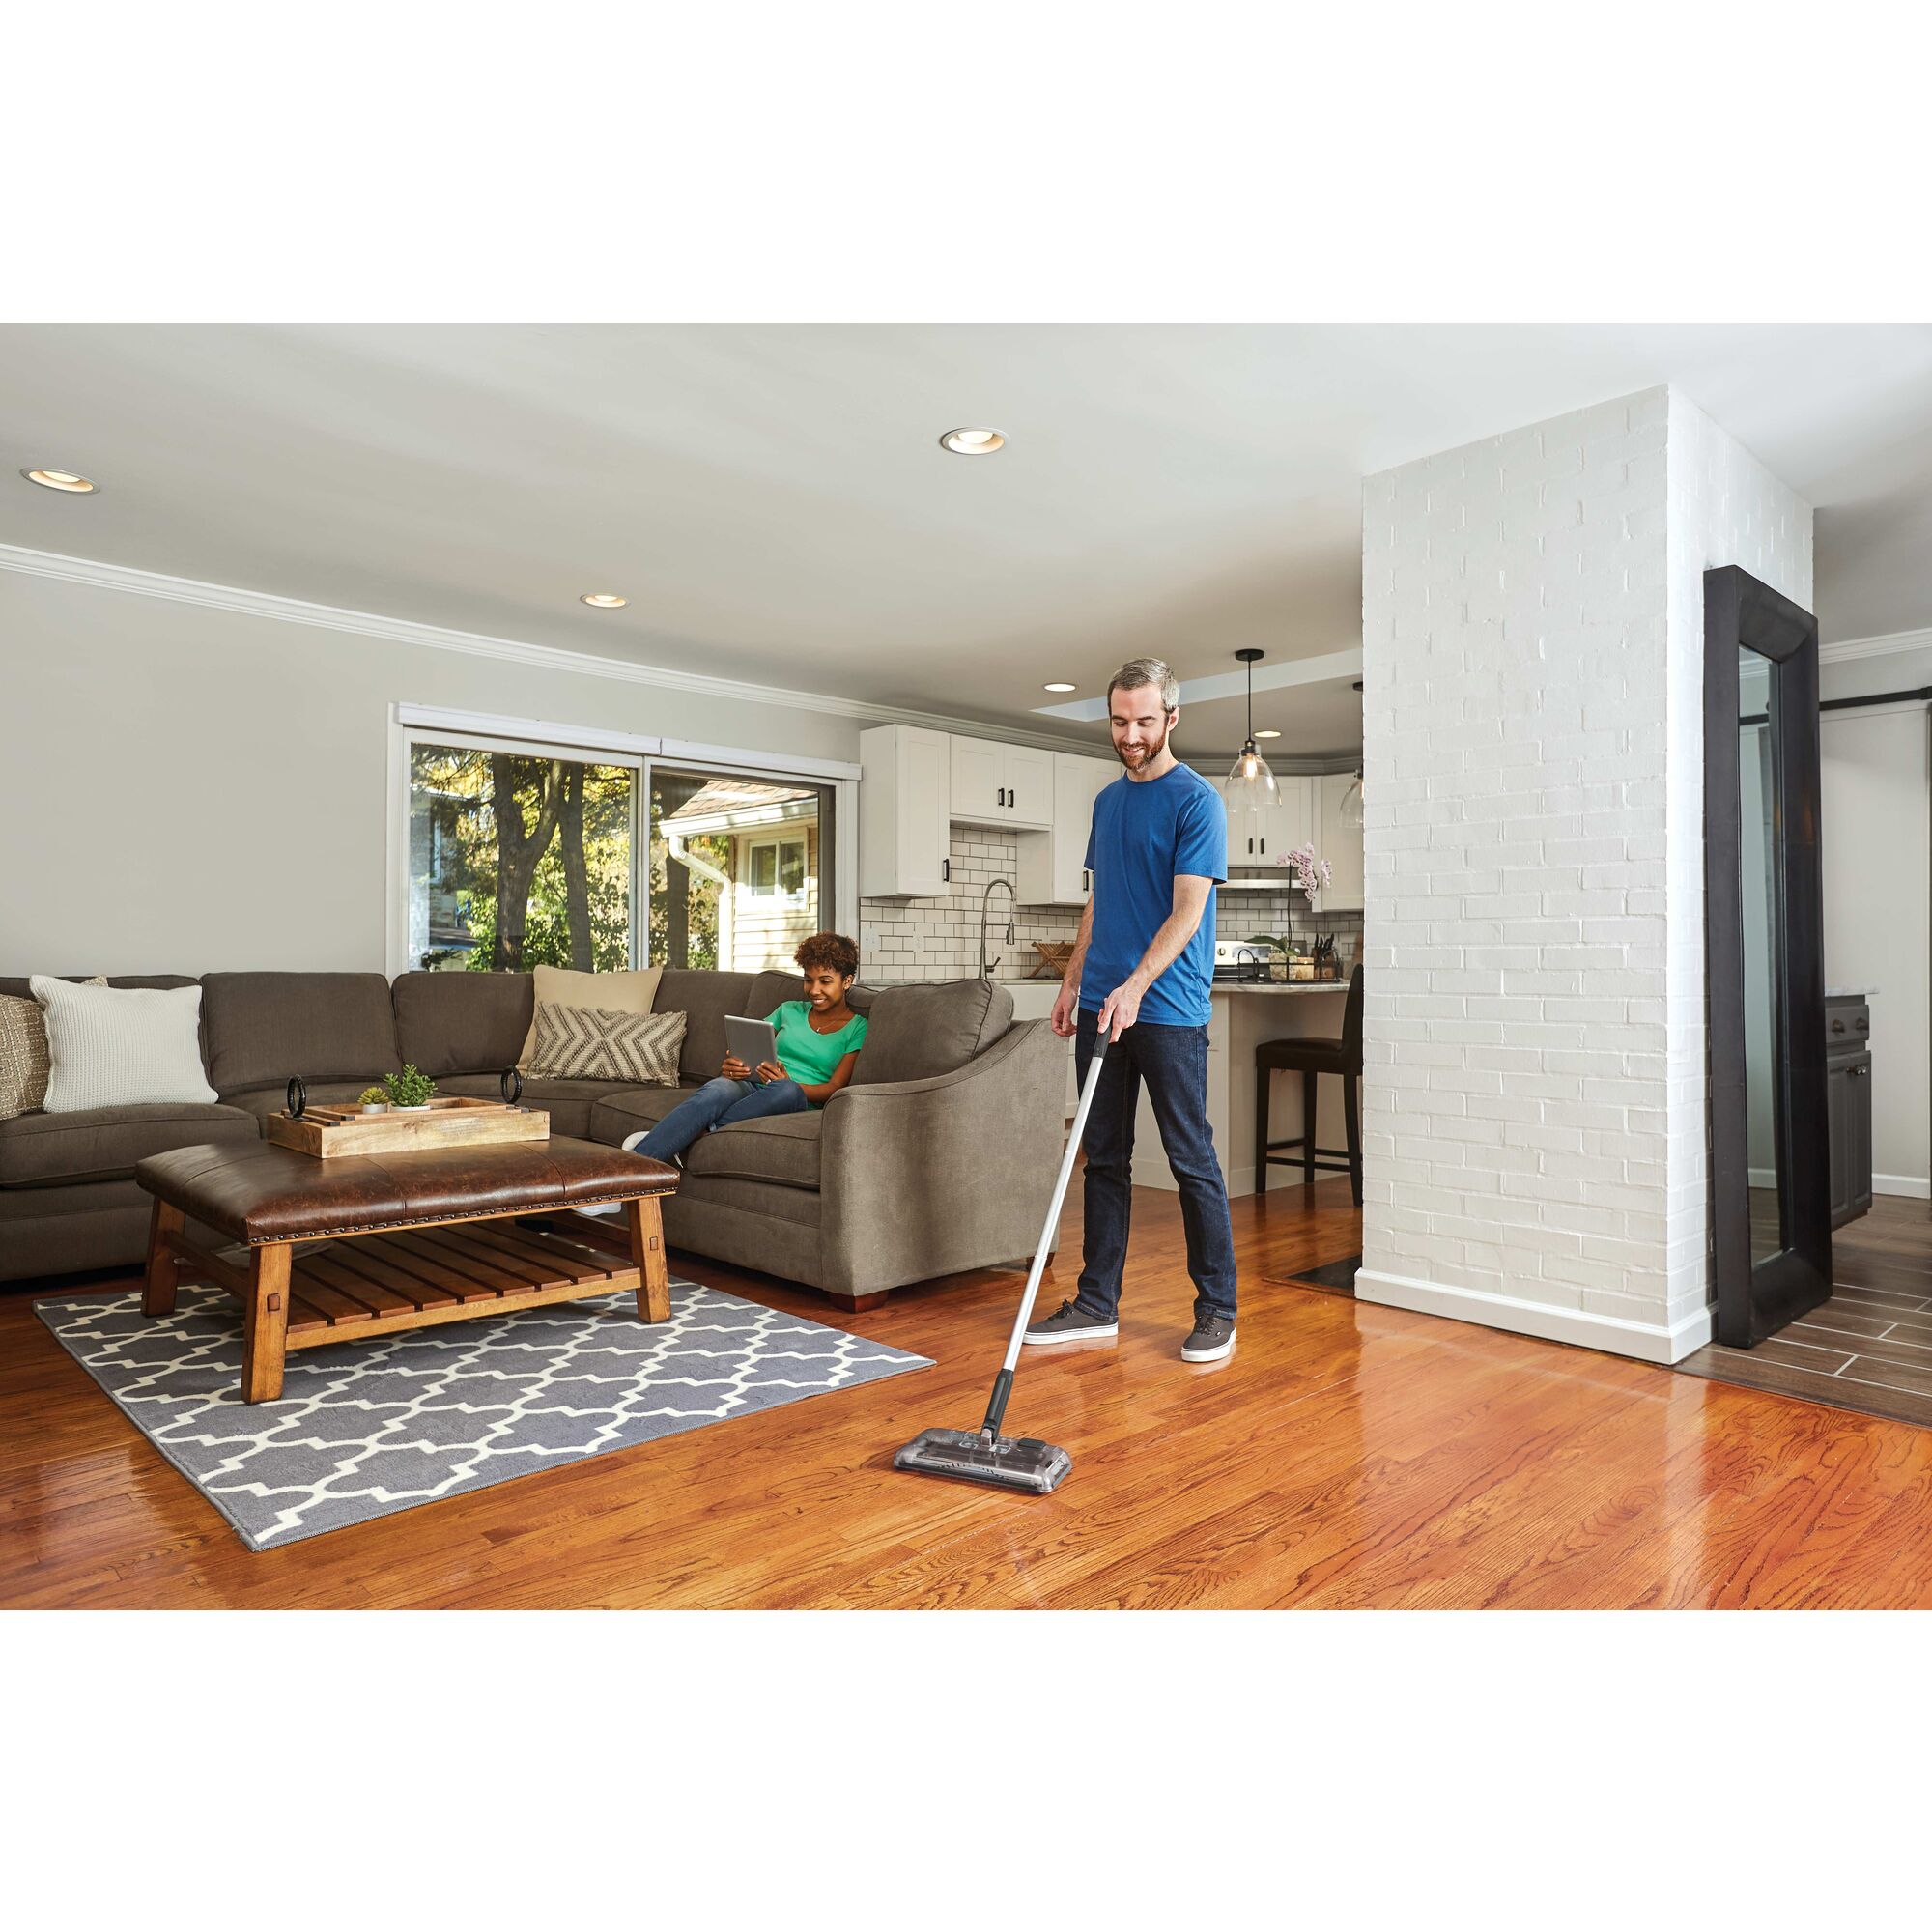 100 Minute Powered Floor Sweeper Charcoal Grey being used by person to clean wooden floor in home environment.